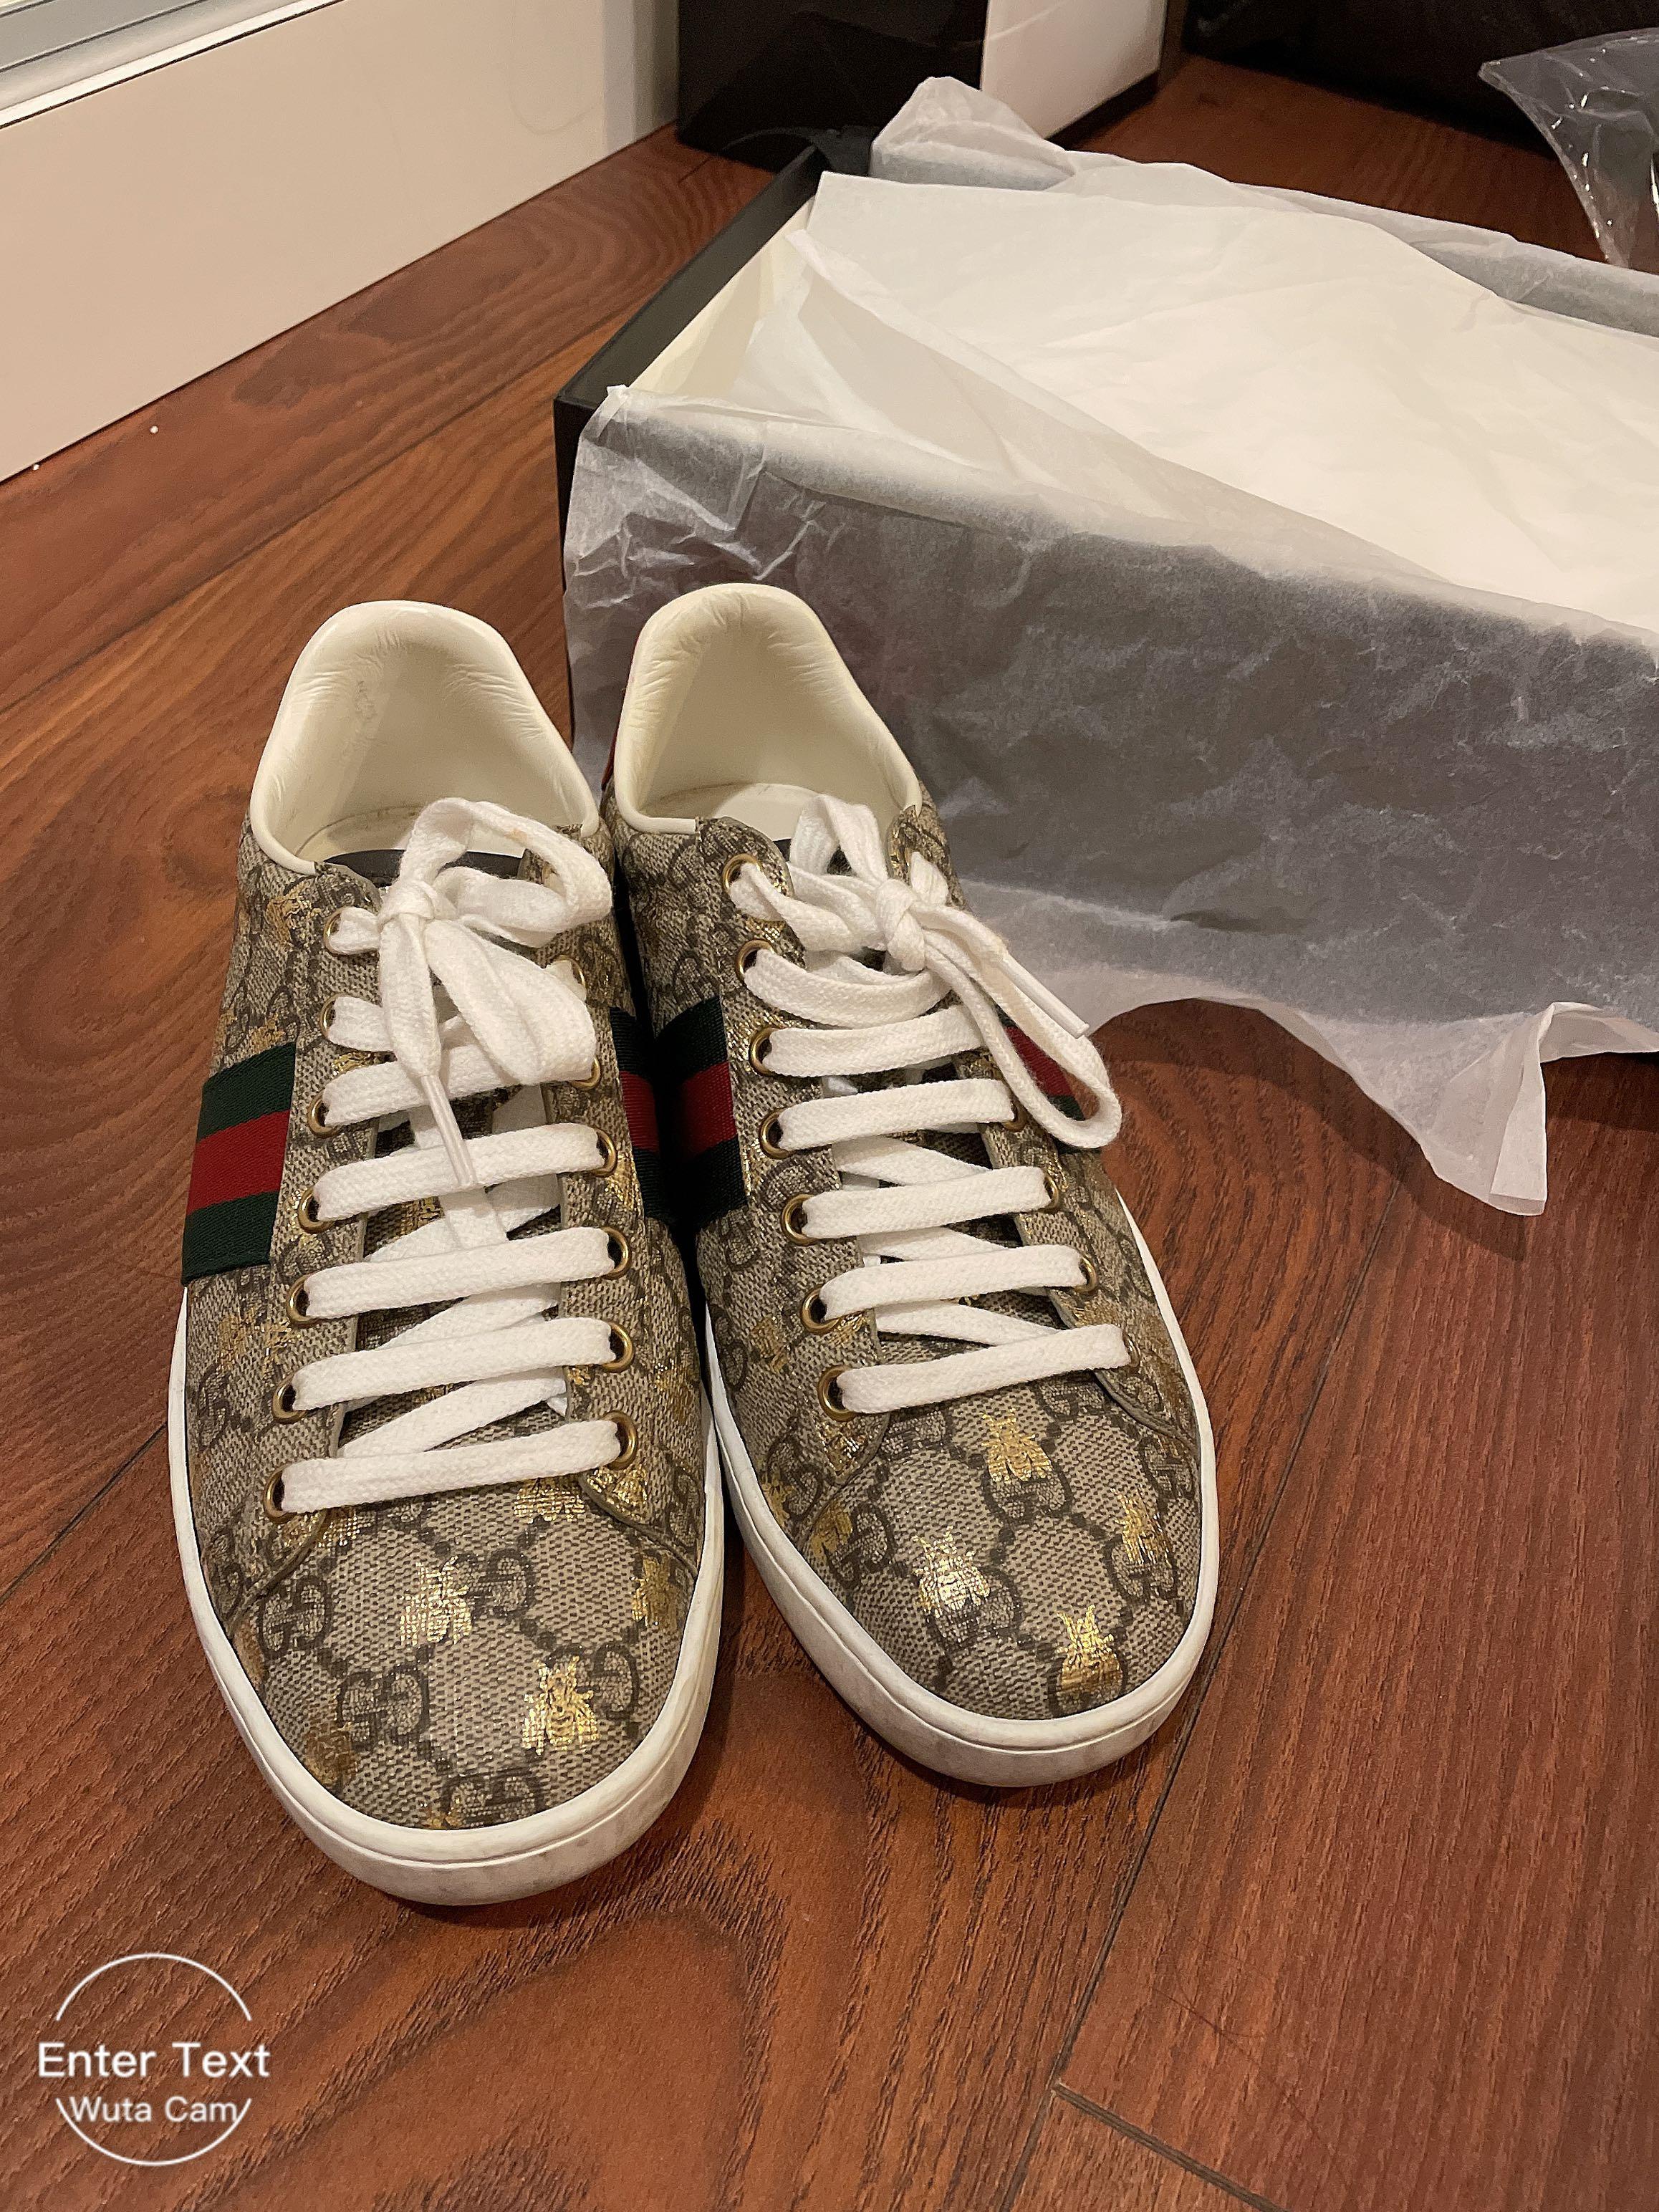 gucci shoes worn out